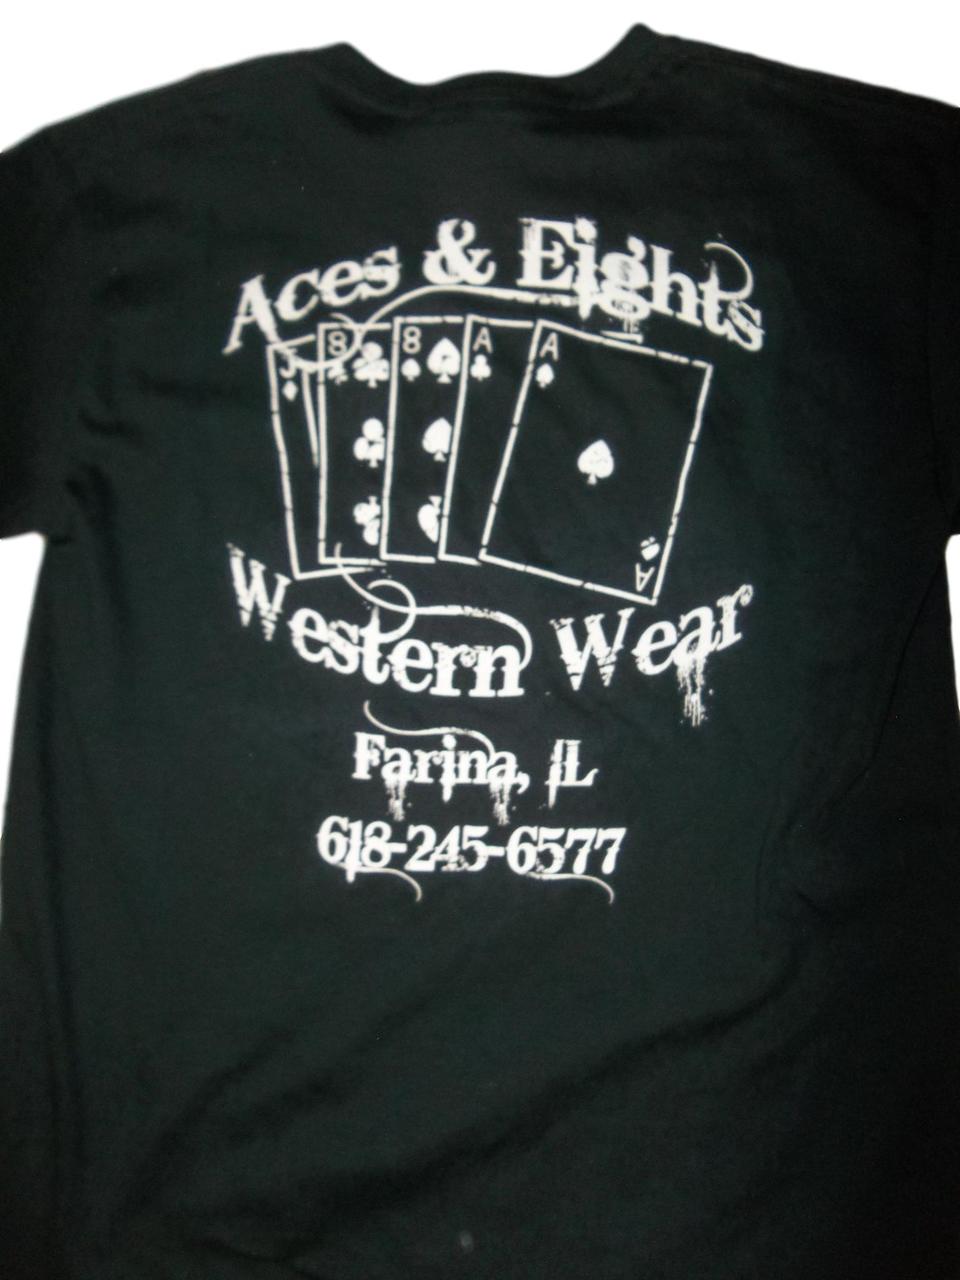 Aces & Eights Youth T-Shirts – Aces & Eights Western Wear, Inc.